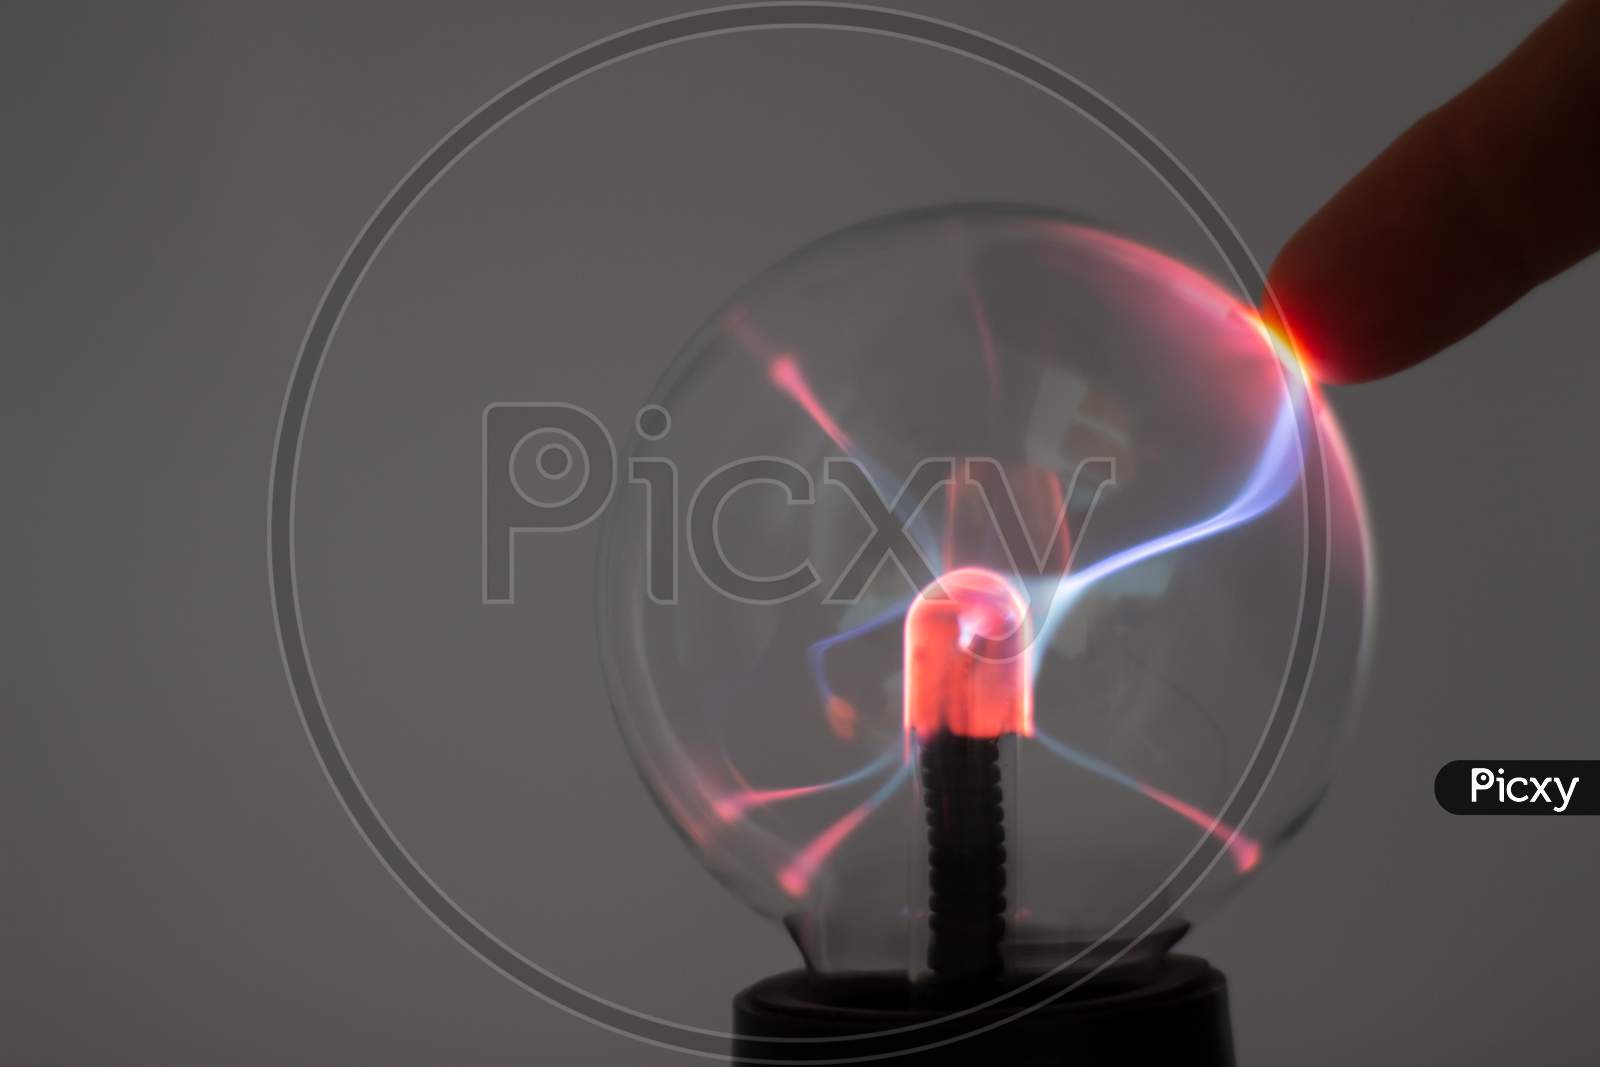 Electricity Lamp Known As A Plasma Lamp. Electric Energy To Generate Light.